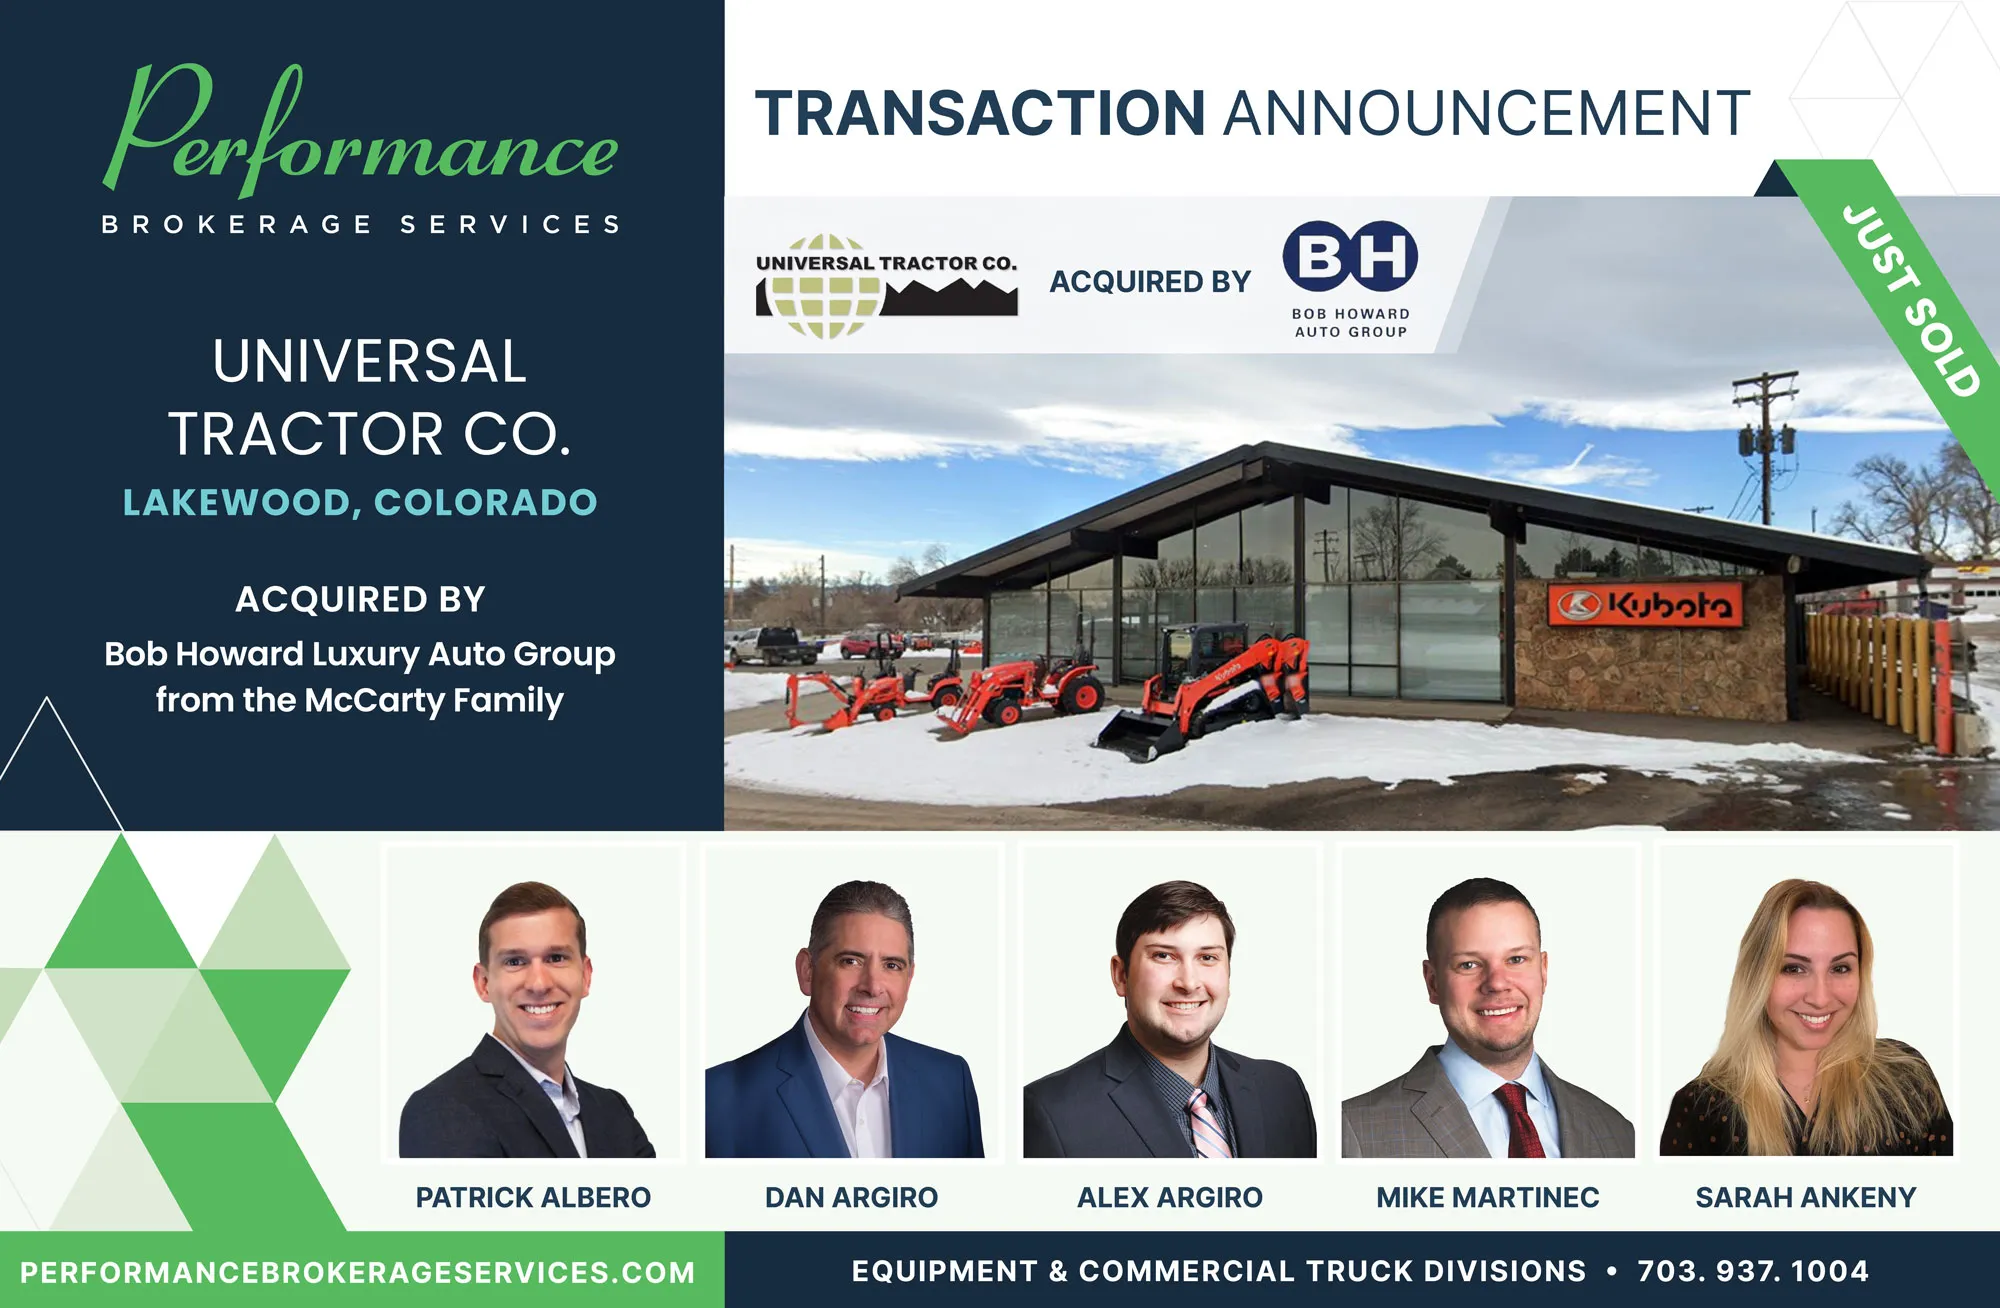 Universal Tractor Co. sells to Bob Howard Luxury Auto Group with Performance Brokerage